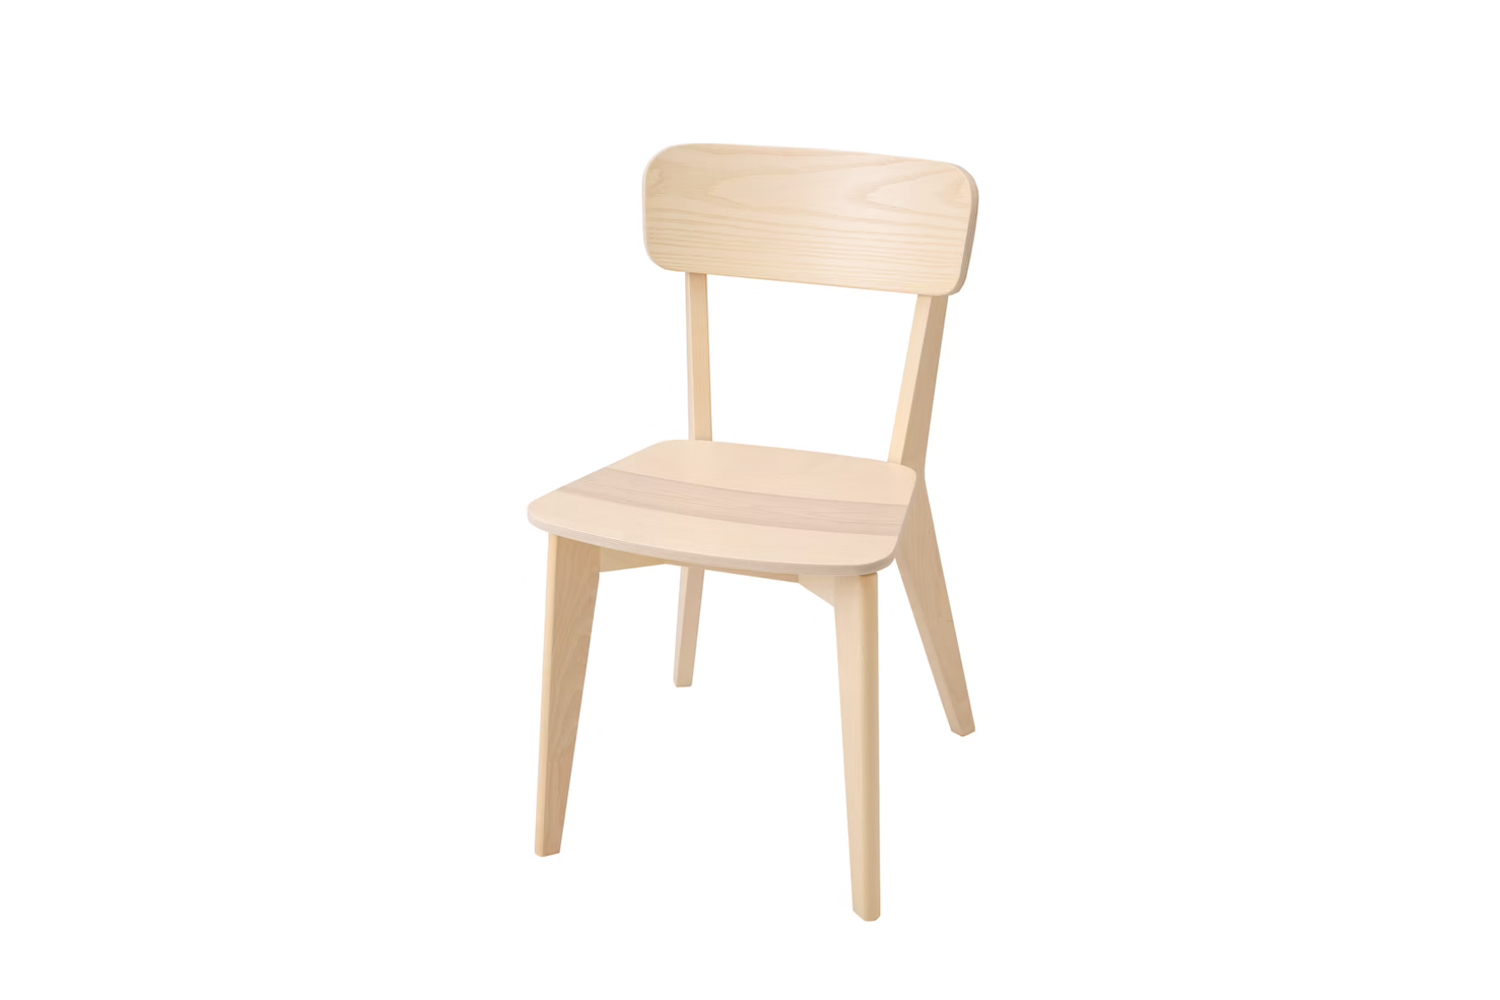 the ikea lisabo chair in ash is \$75. 14